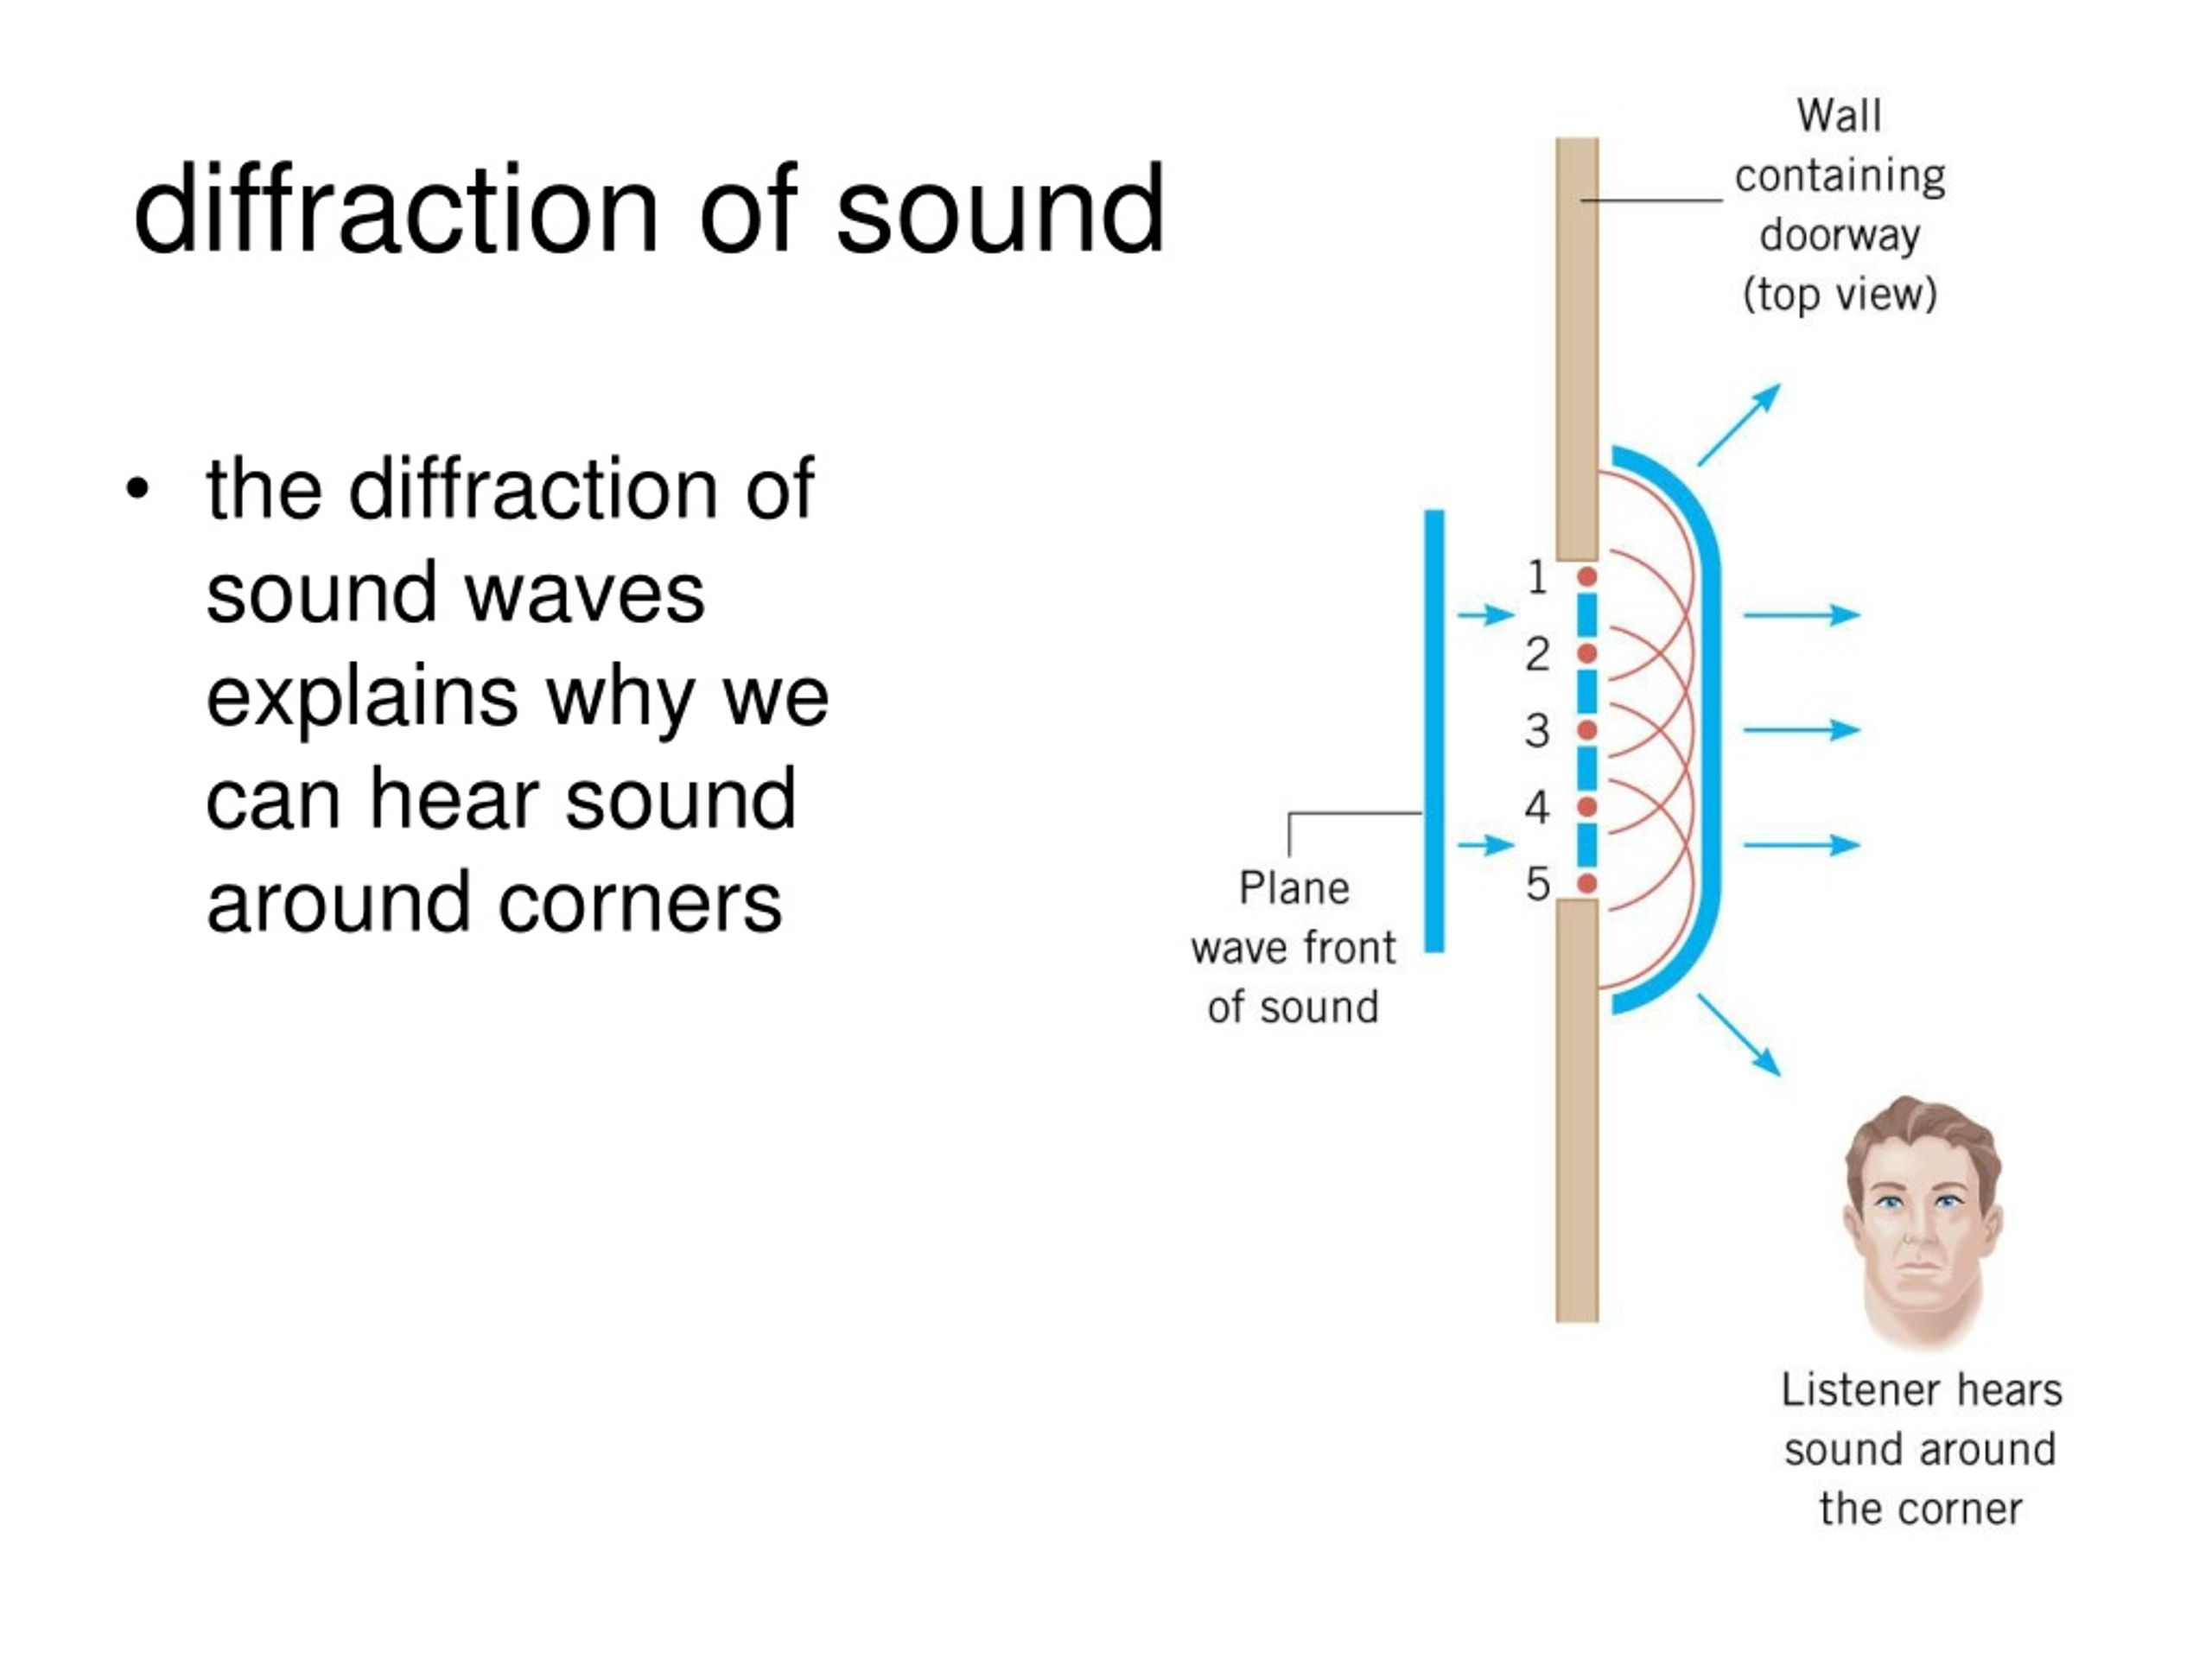 does sound diffract